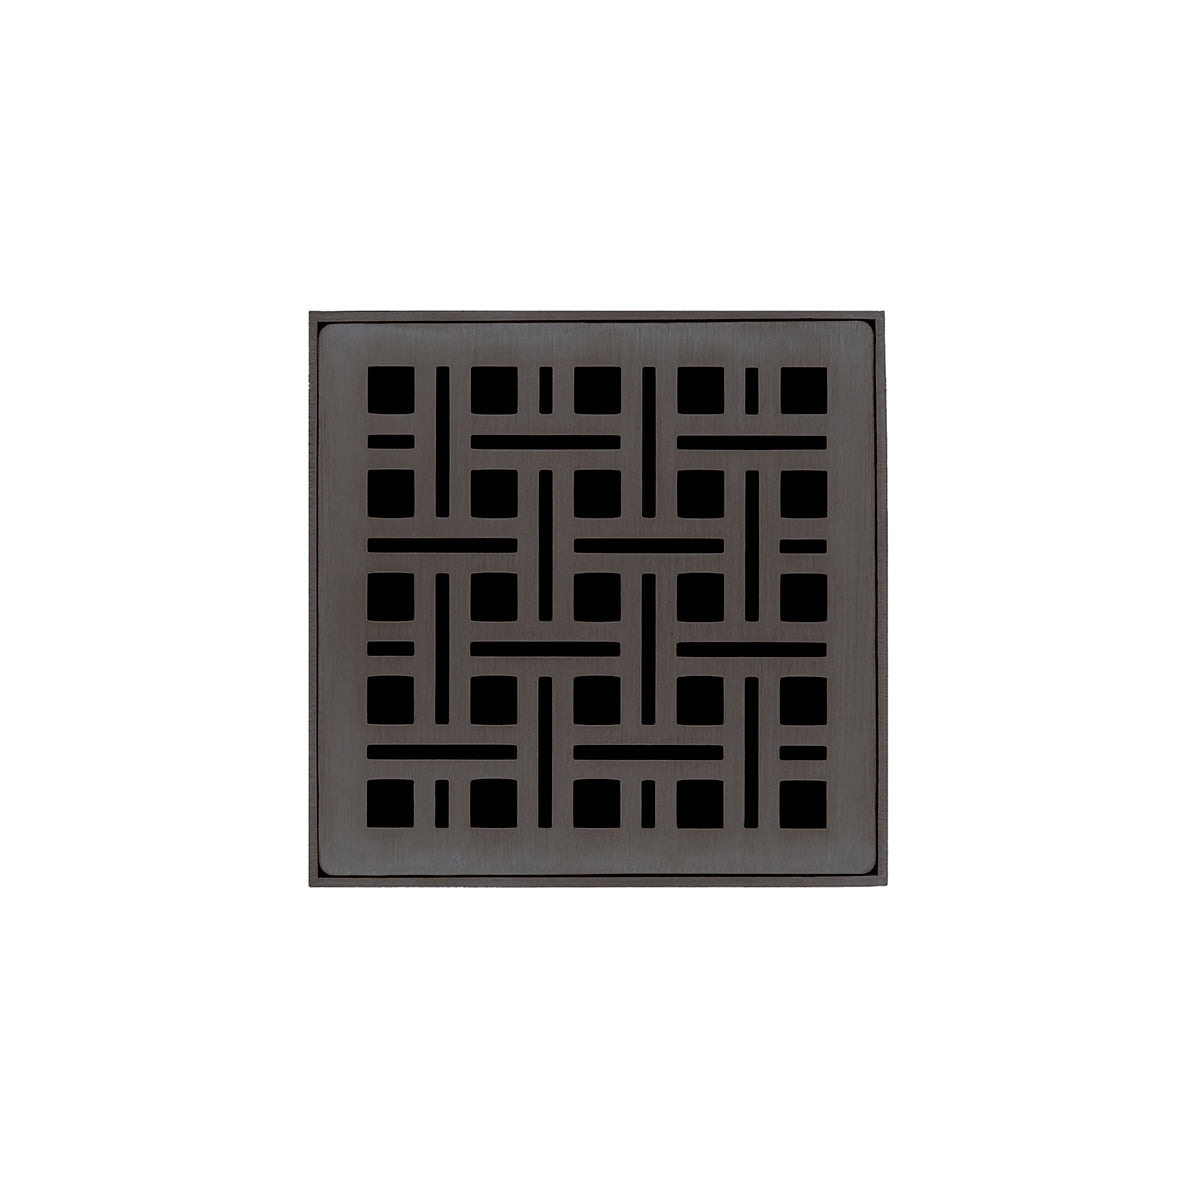 Infinity Drain 4" x 4" VD 4 Premium Center Drain Kit with Weave Pattern Decorative Plate with Cast Iron Drain Body, 2" Outlet